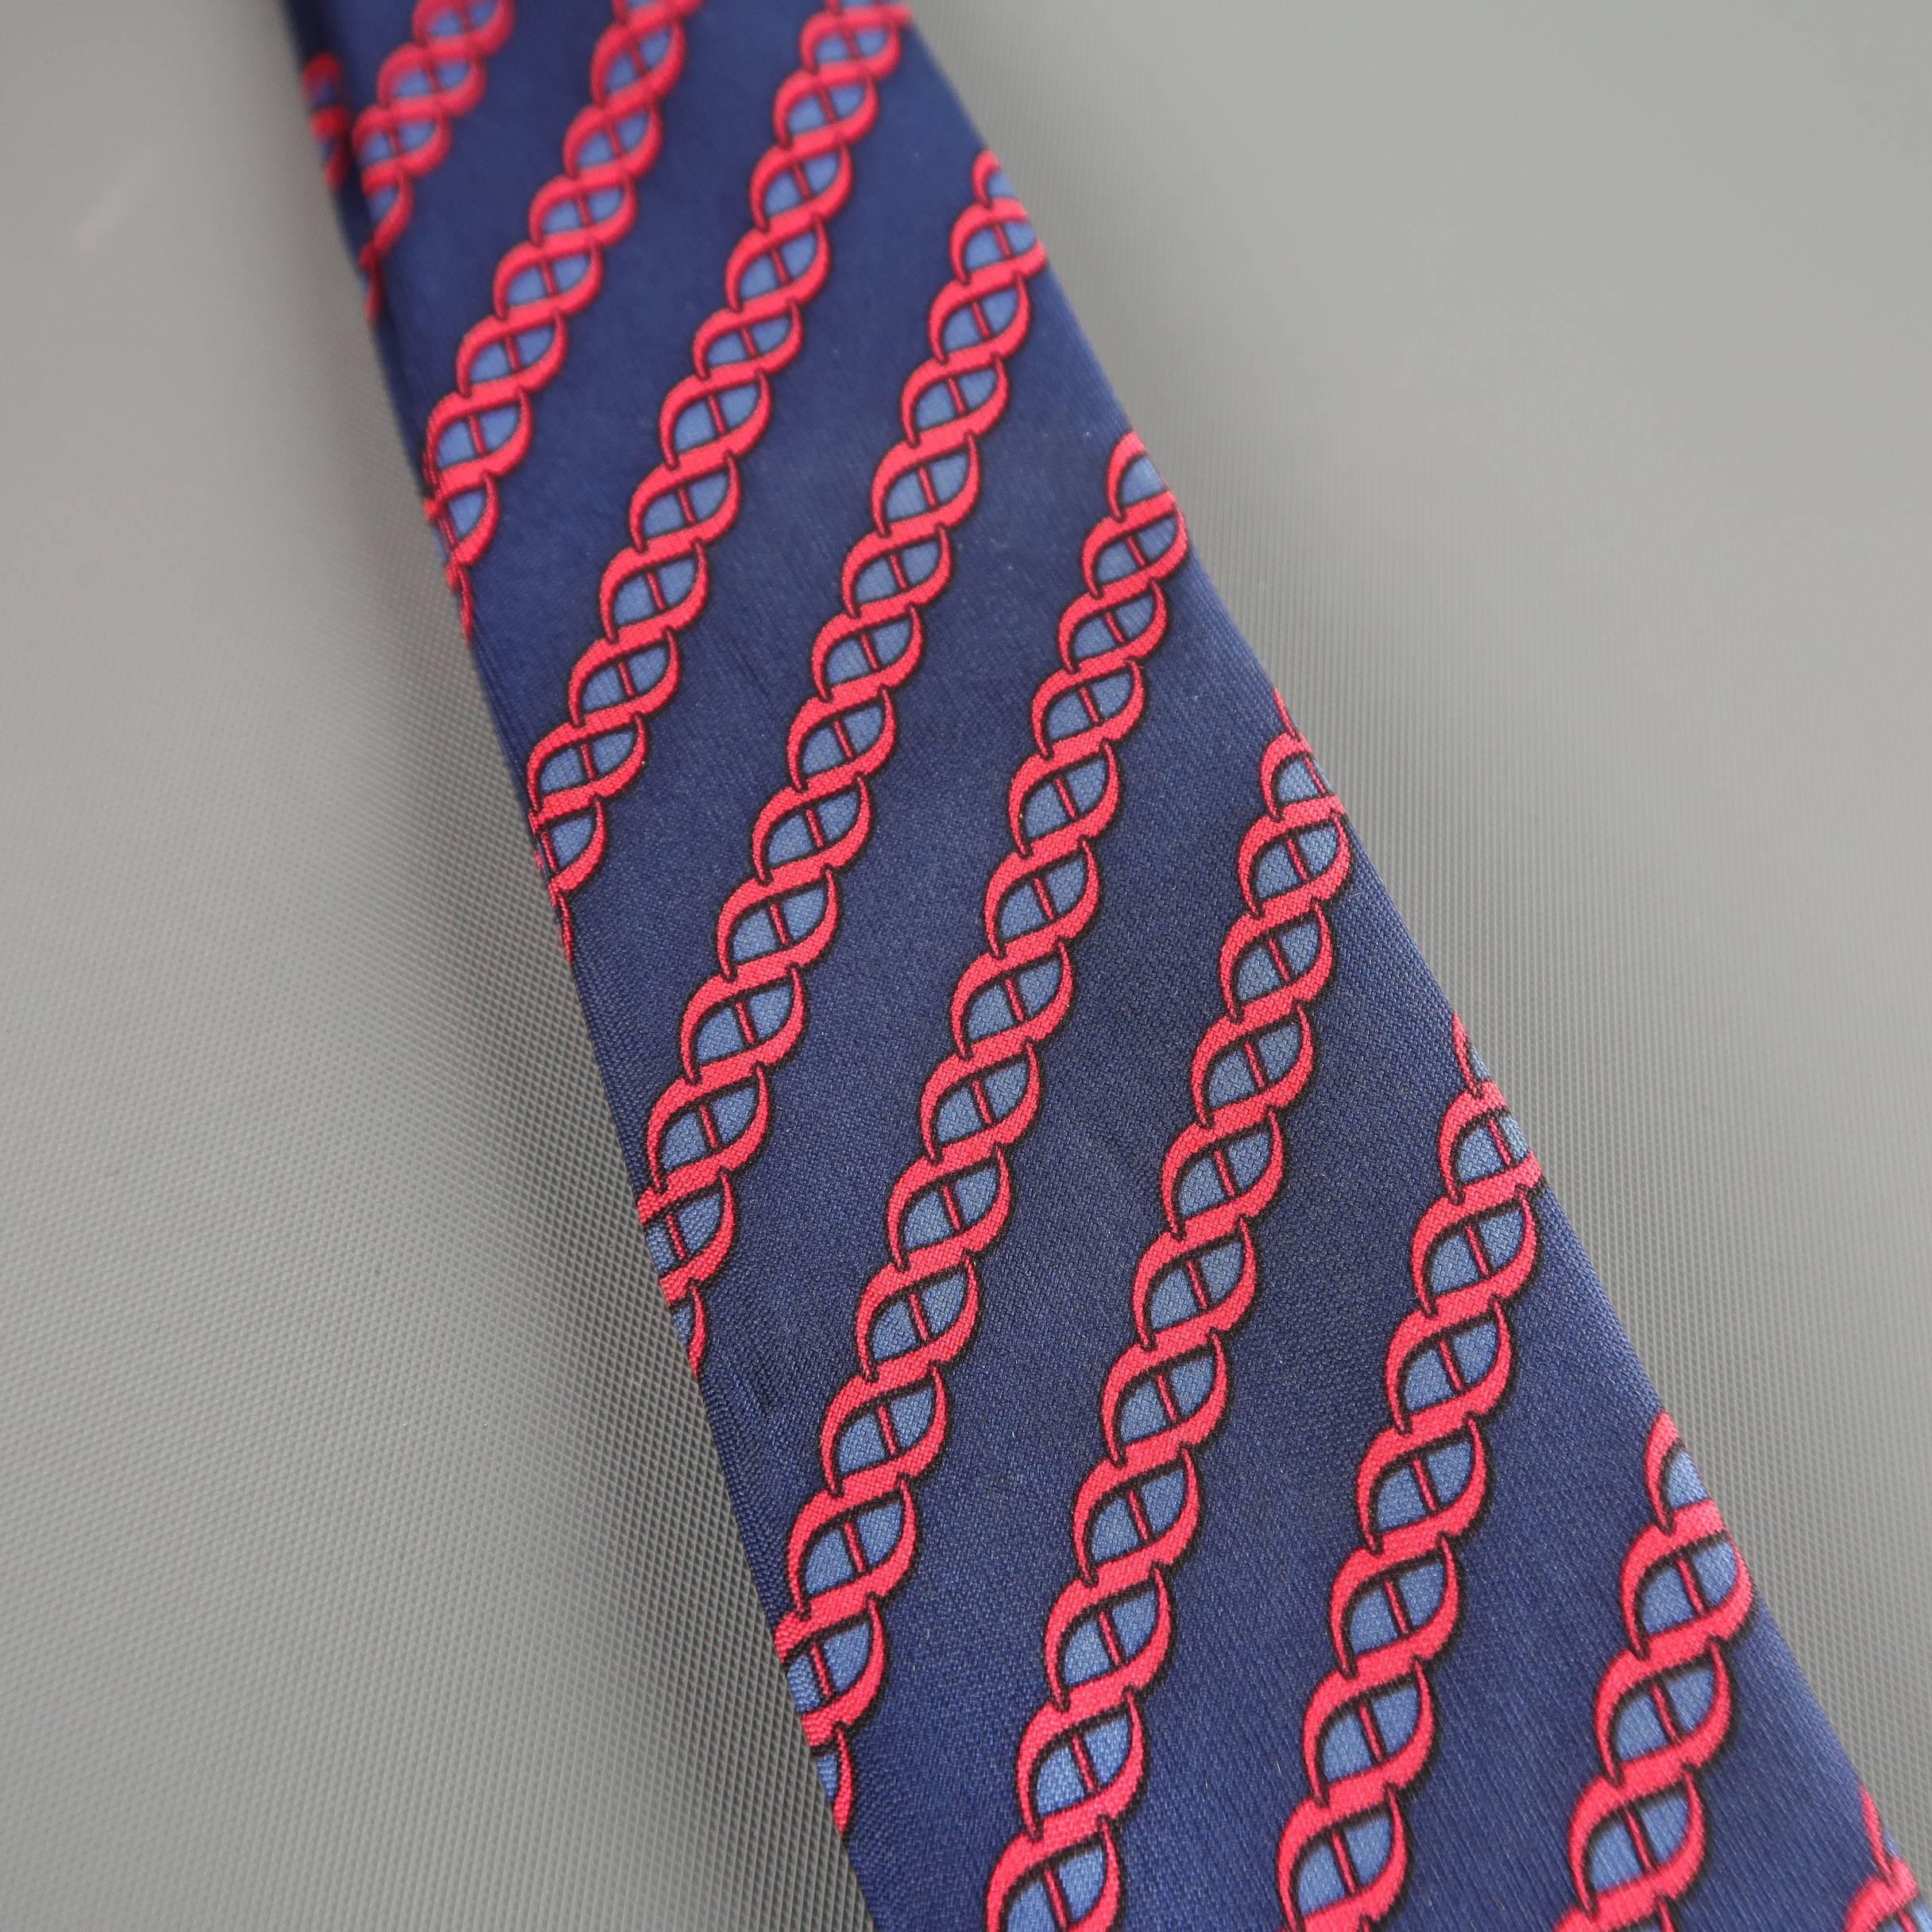 Vintage HERMES necktie comes in navy blue silk twill with all over red and blue diagonal twist stripe pattern print. Made in France.
 
Good Pre-Owned Condition.
 
Width: 3.25 in.
